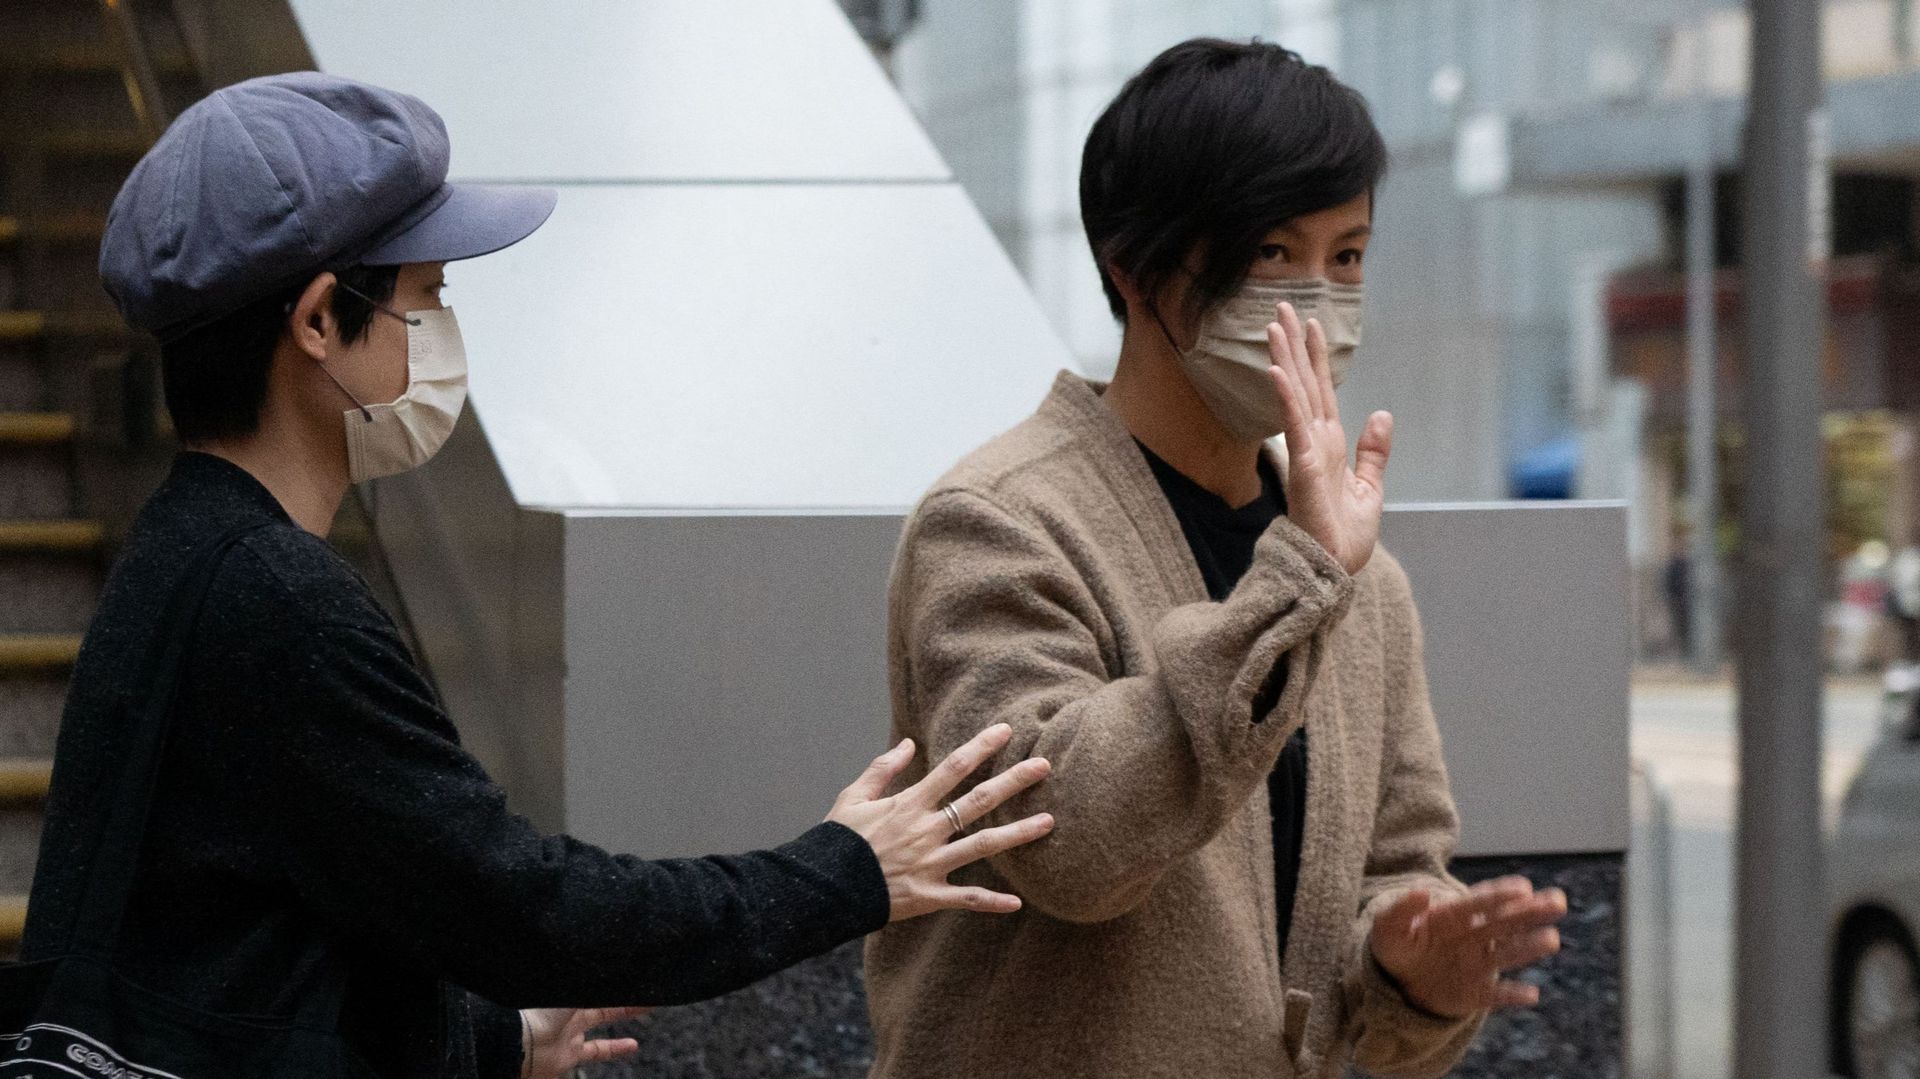 Pro-democracy activist and singer Denise Ho (R), a former board member of Stand News, leaves the Western Police Station after being released from custody in Hong Kong on December 30, 2021, following her arrest 